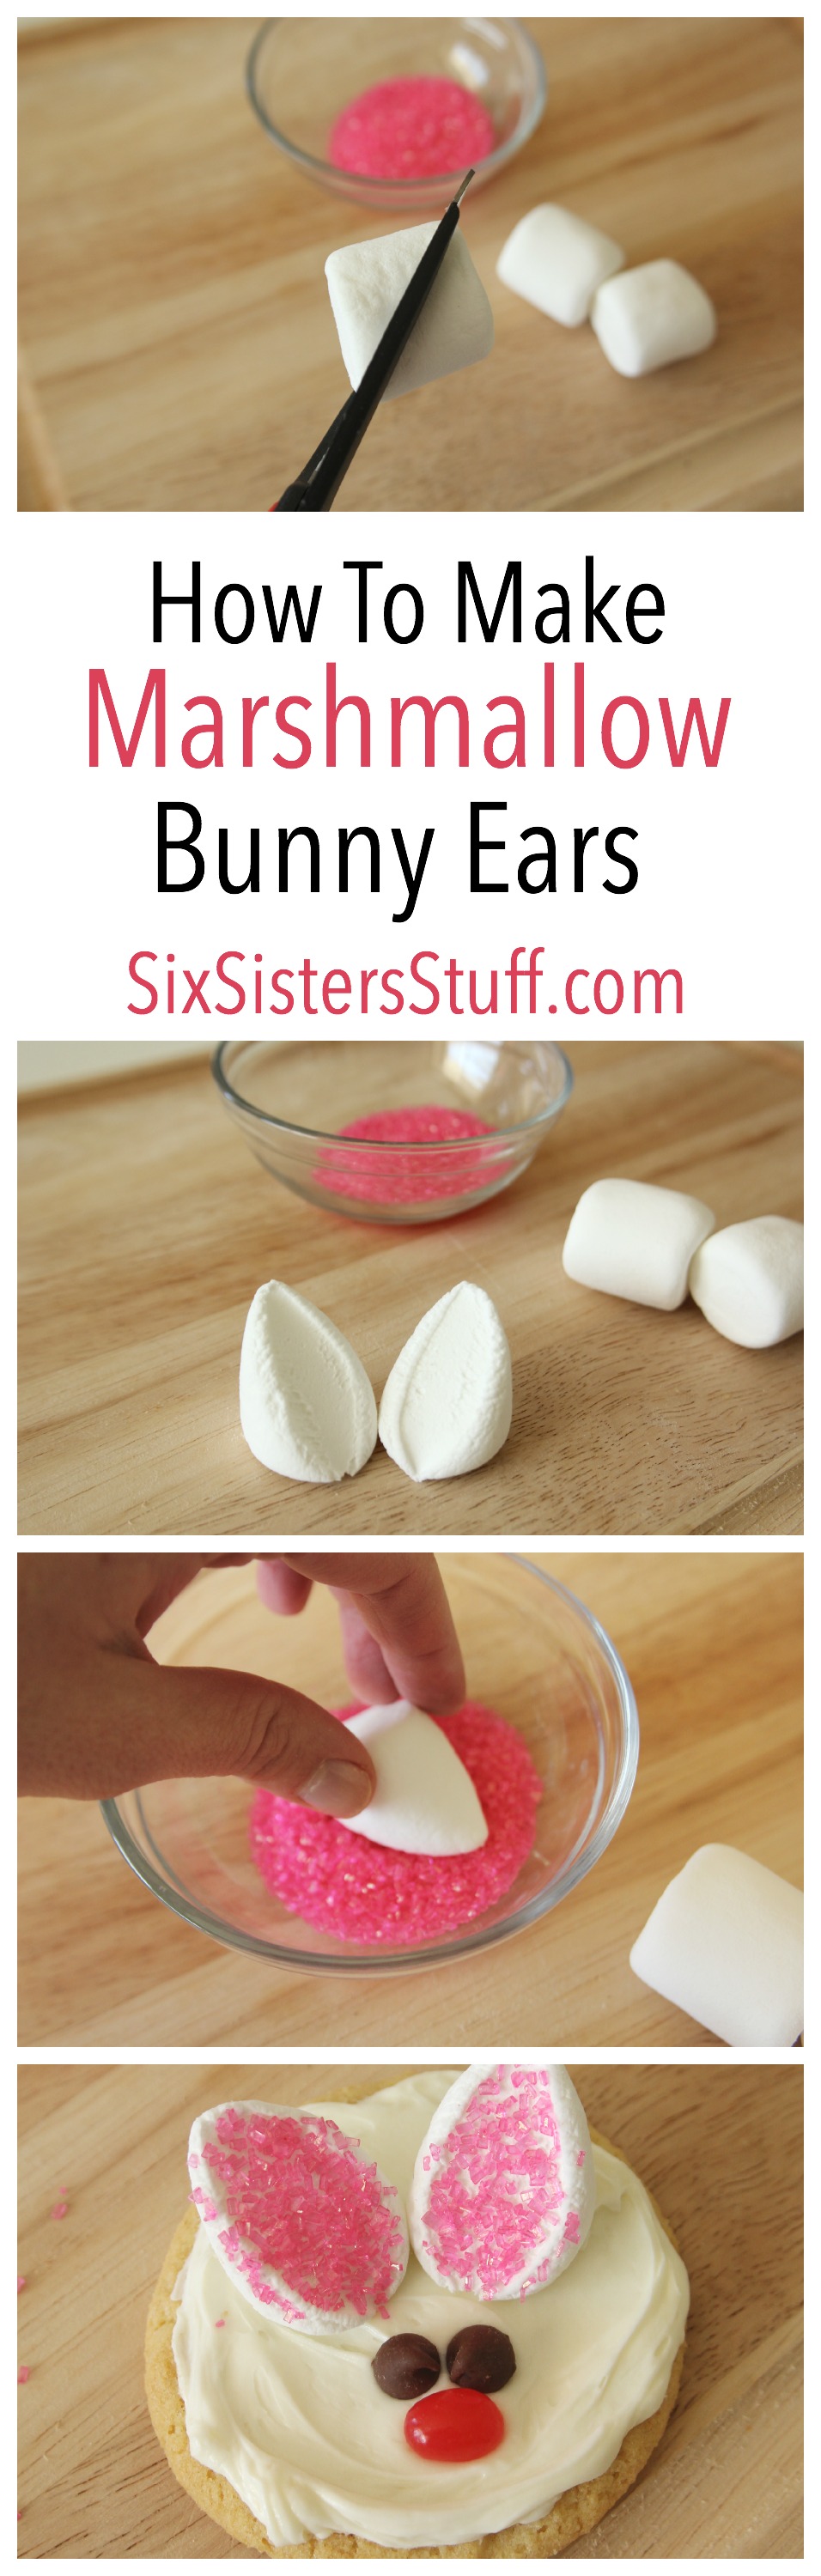 How To Make Marshmallow Bunny Ears on SixSistersStuff